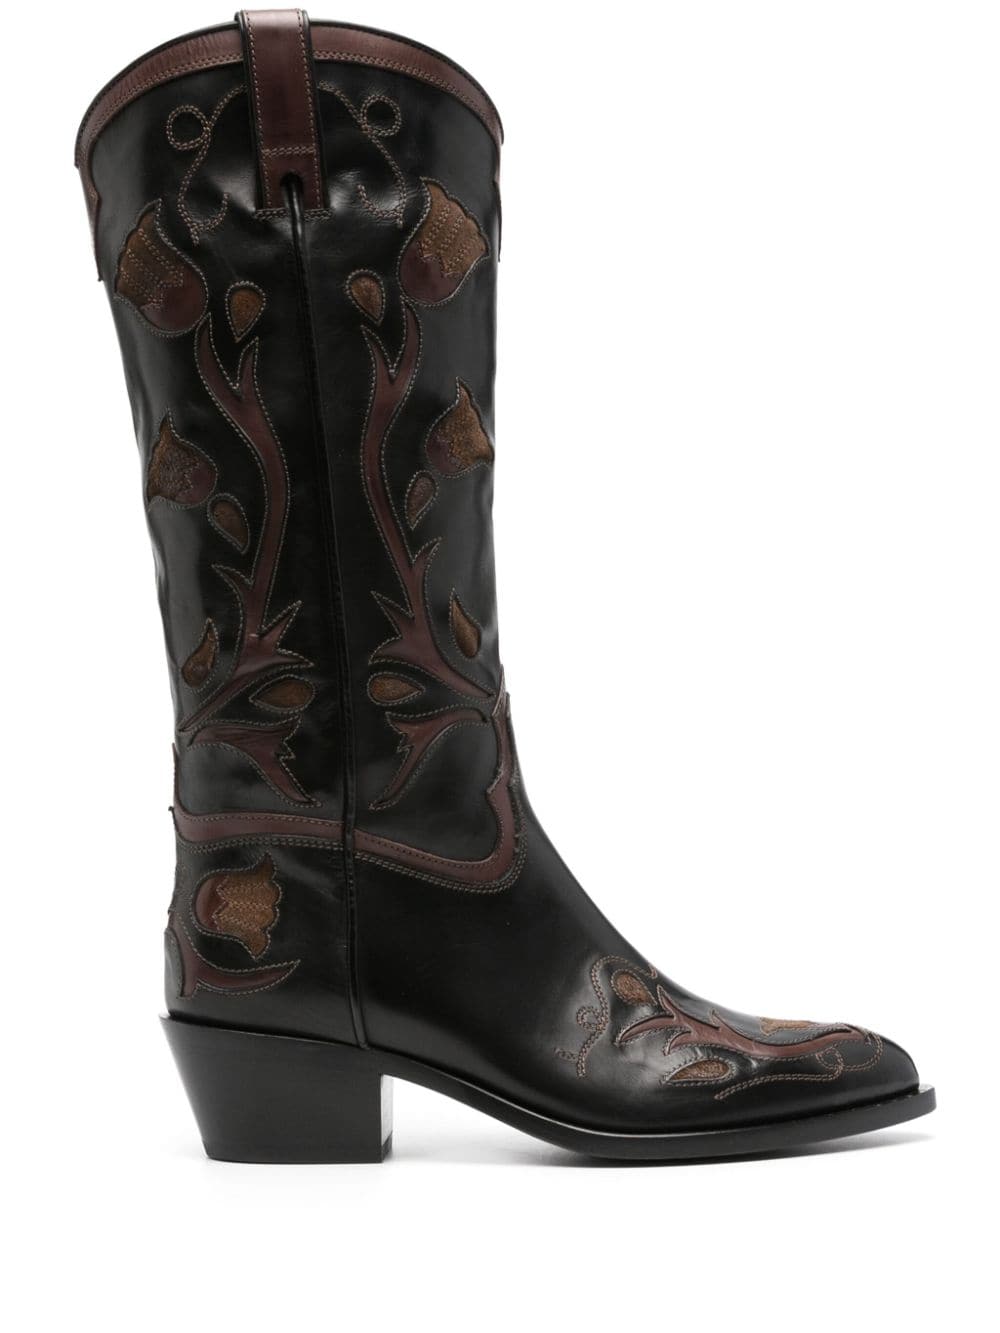 45mm western knee-high leather boots